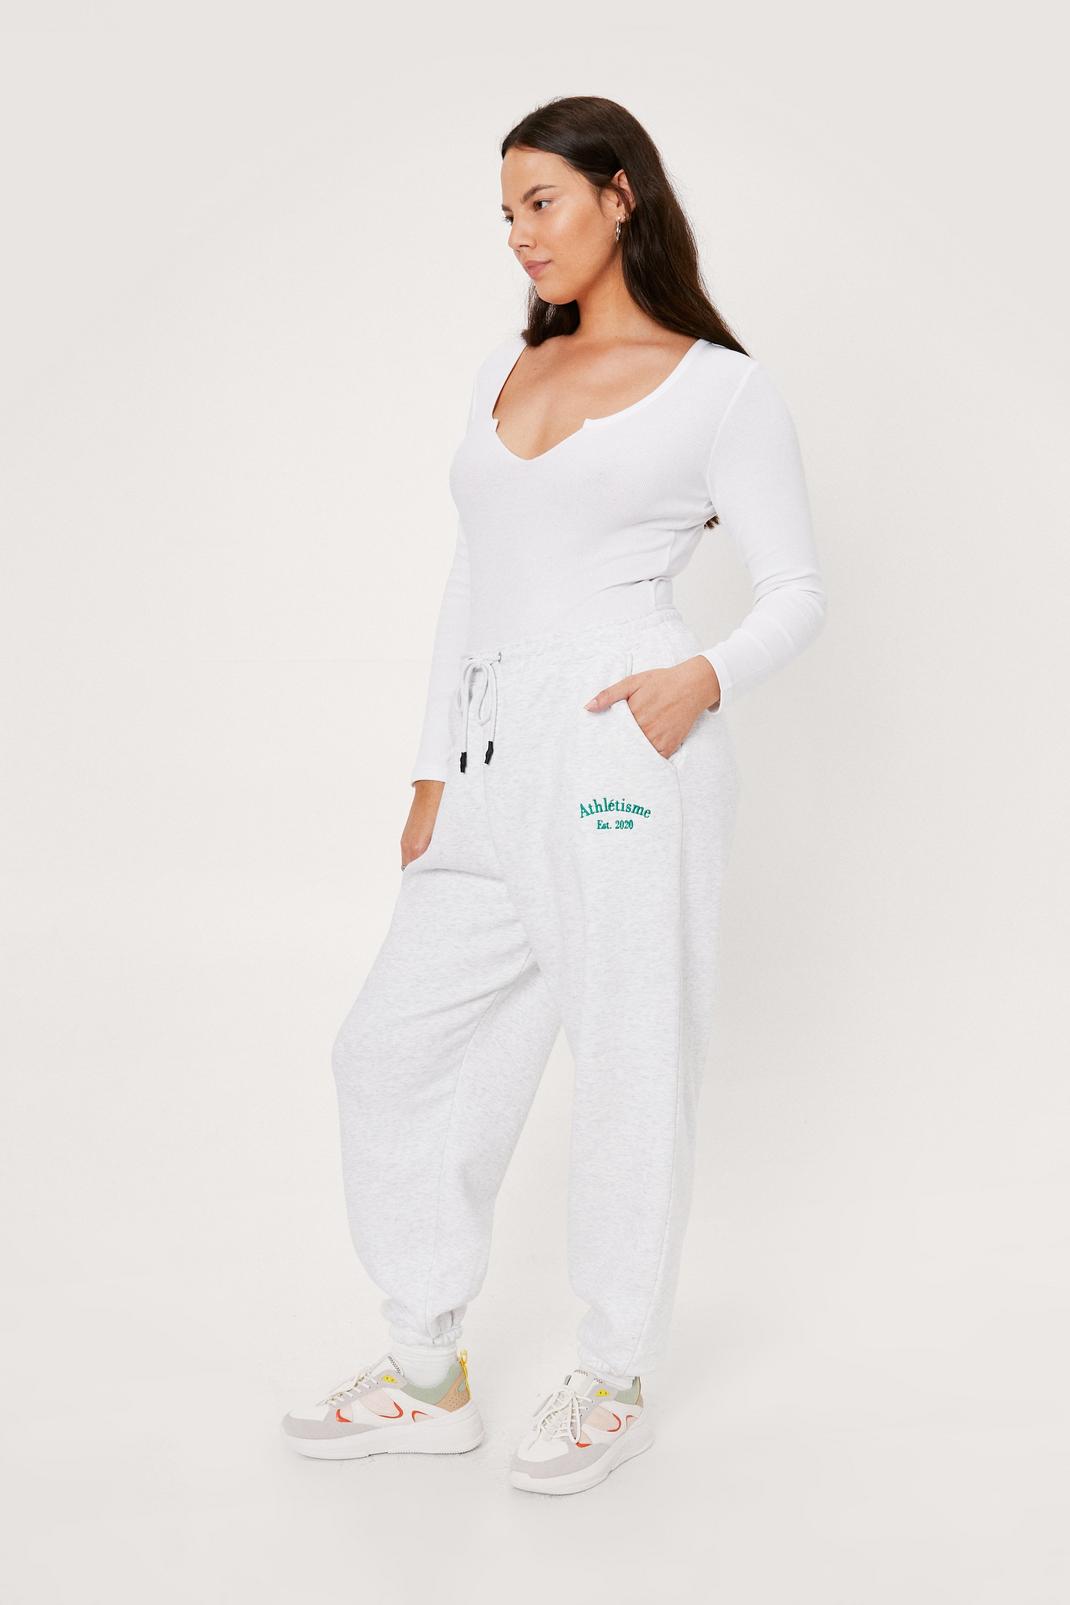 Grey marl Plus Size Athletisme Relaxed Sweatpants image number 1